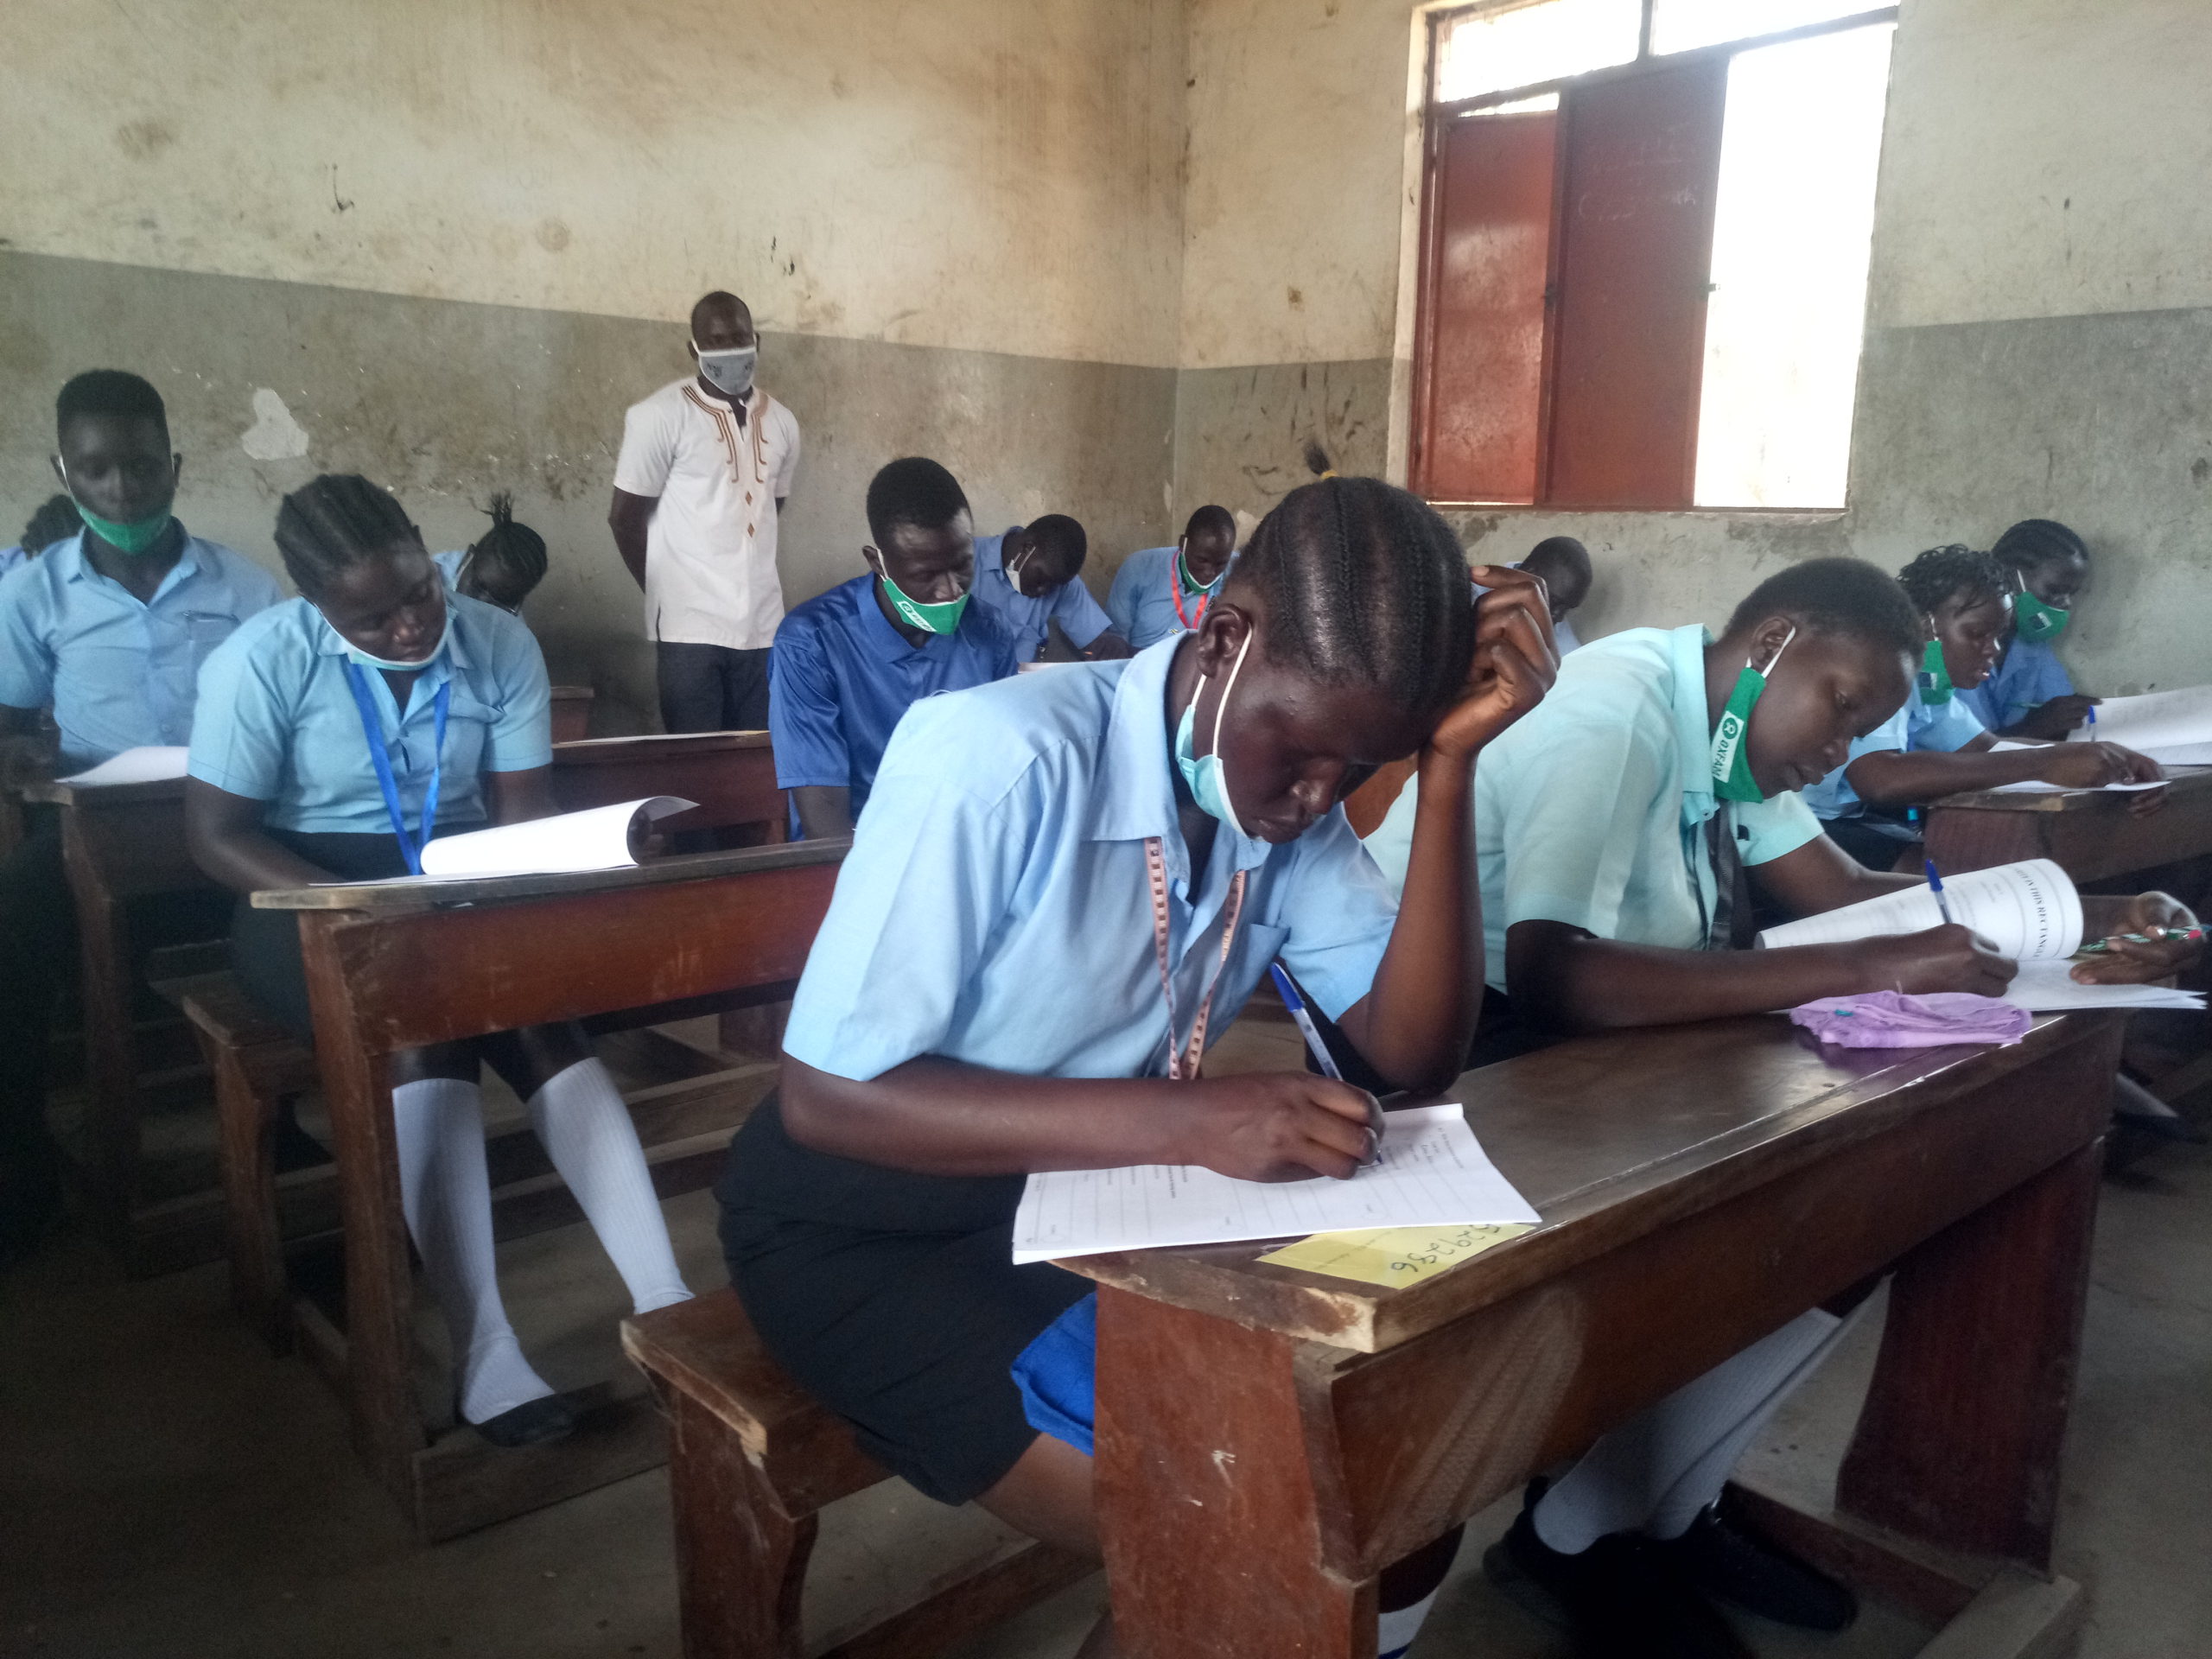 Over 200 students in Unity state likely to miss exams due to conflict